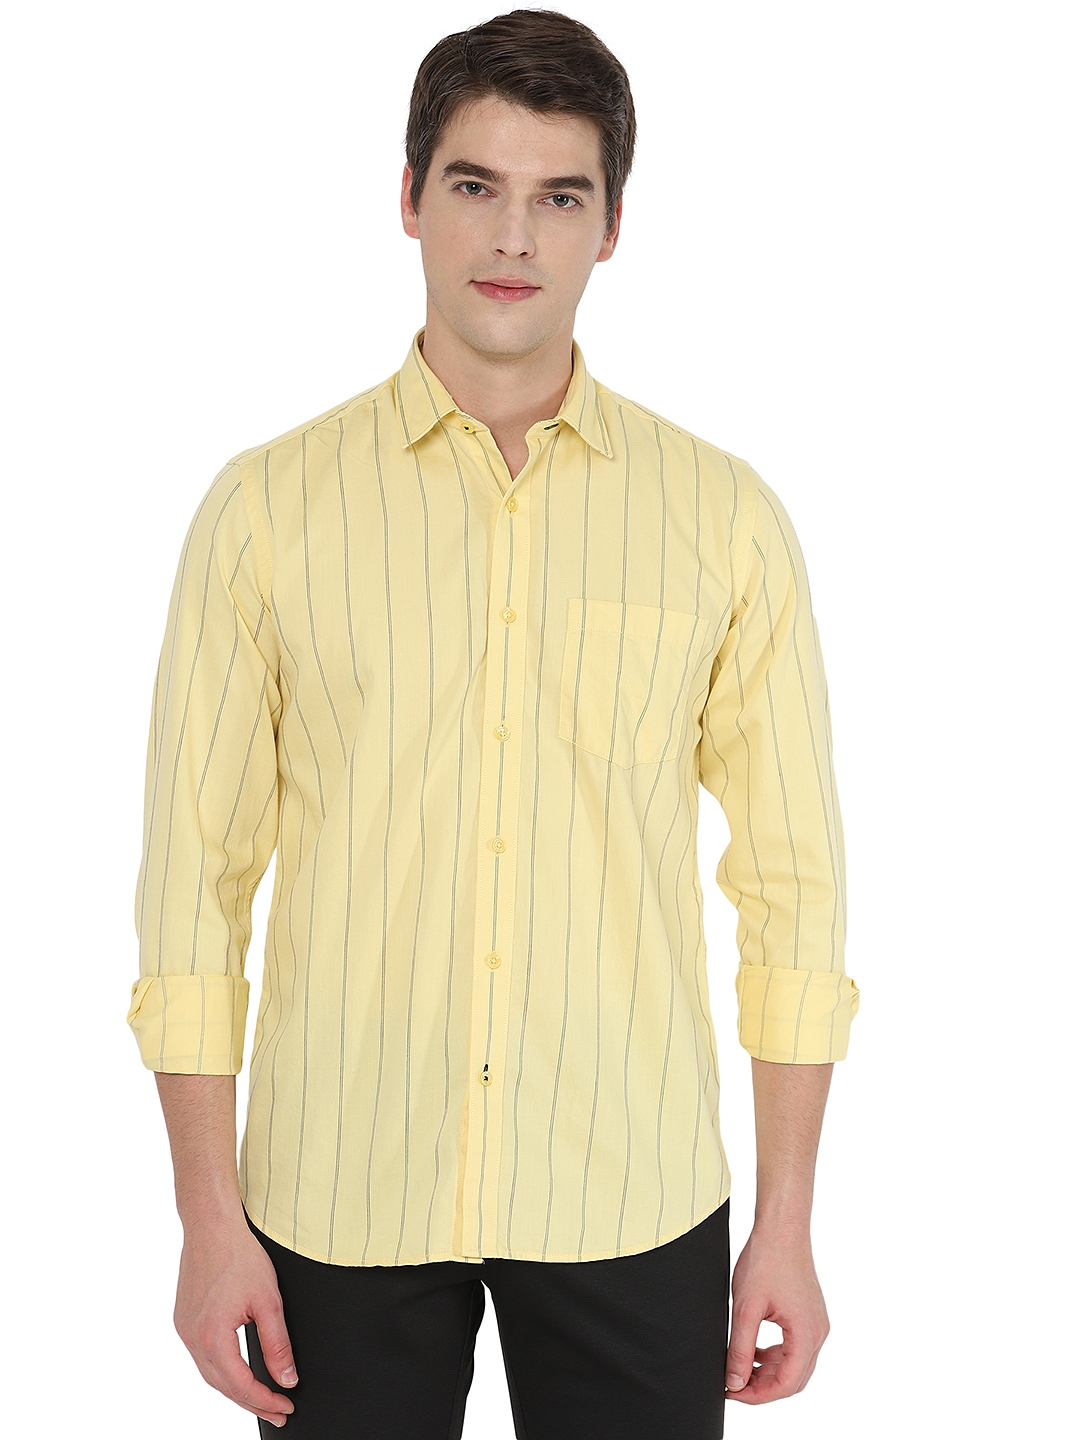 Greenfibre | Yellow Striped Slim Fit Casual Shirt | Greenfibre